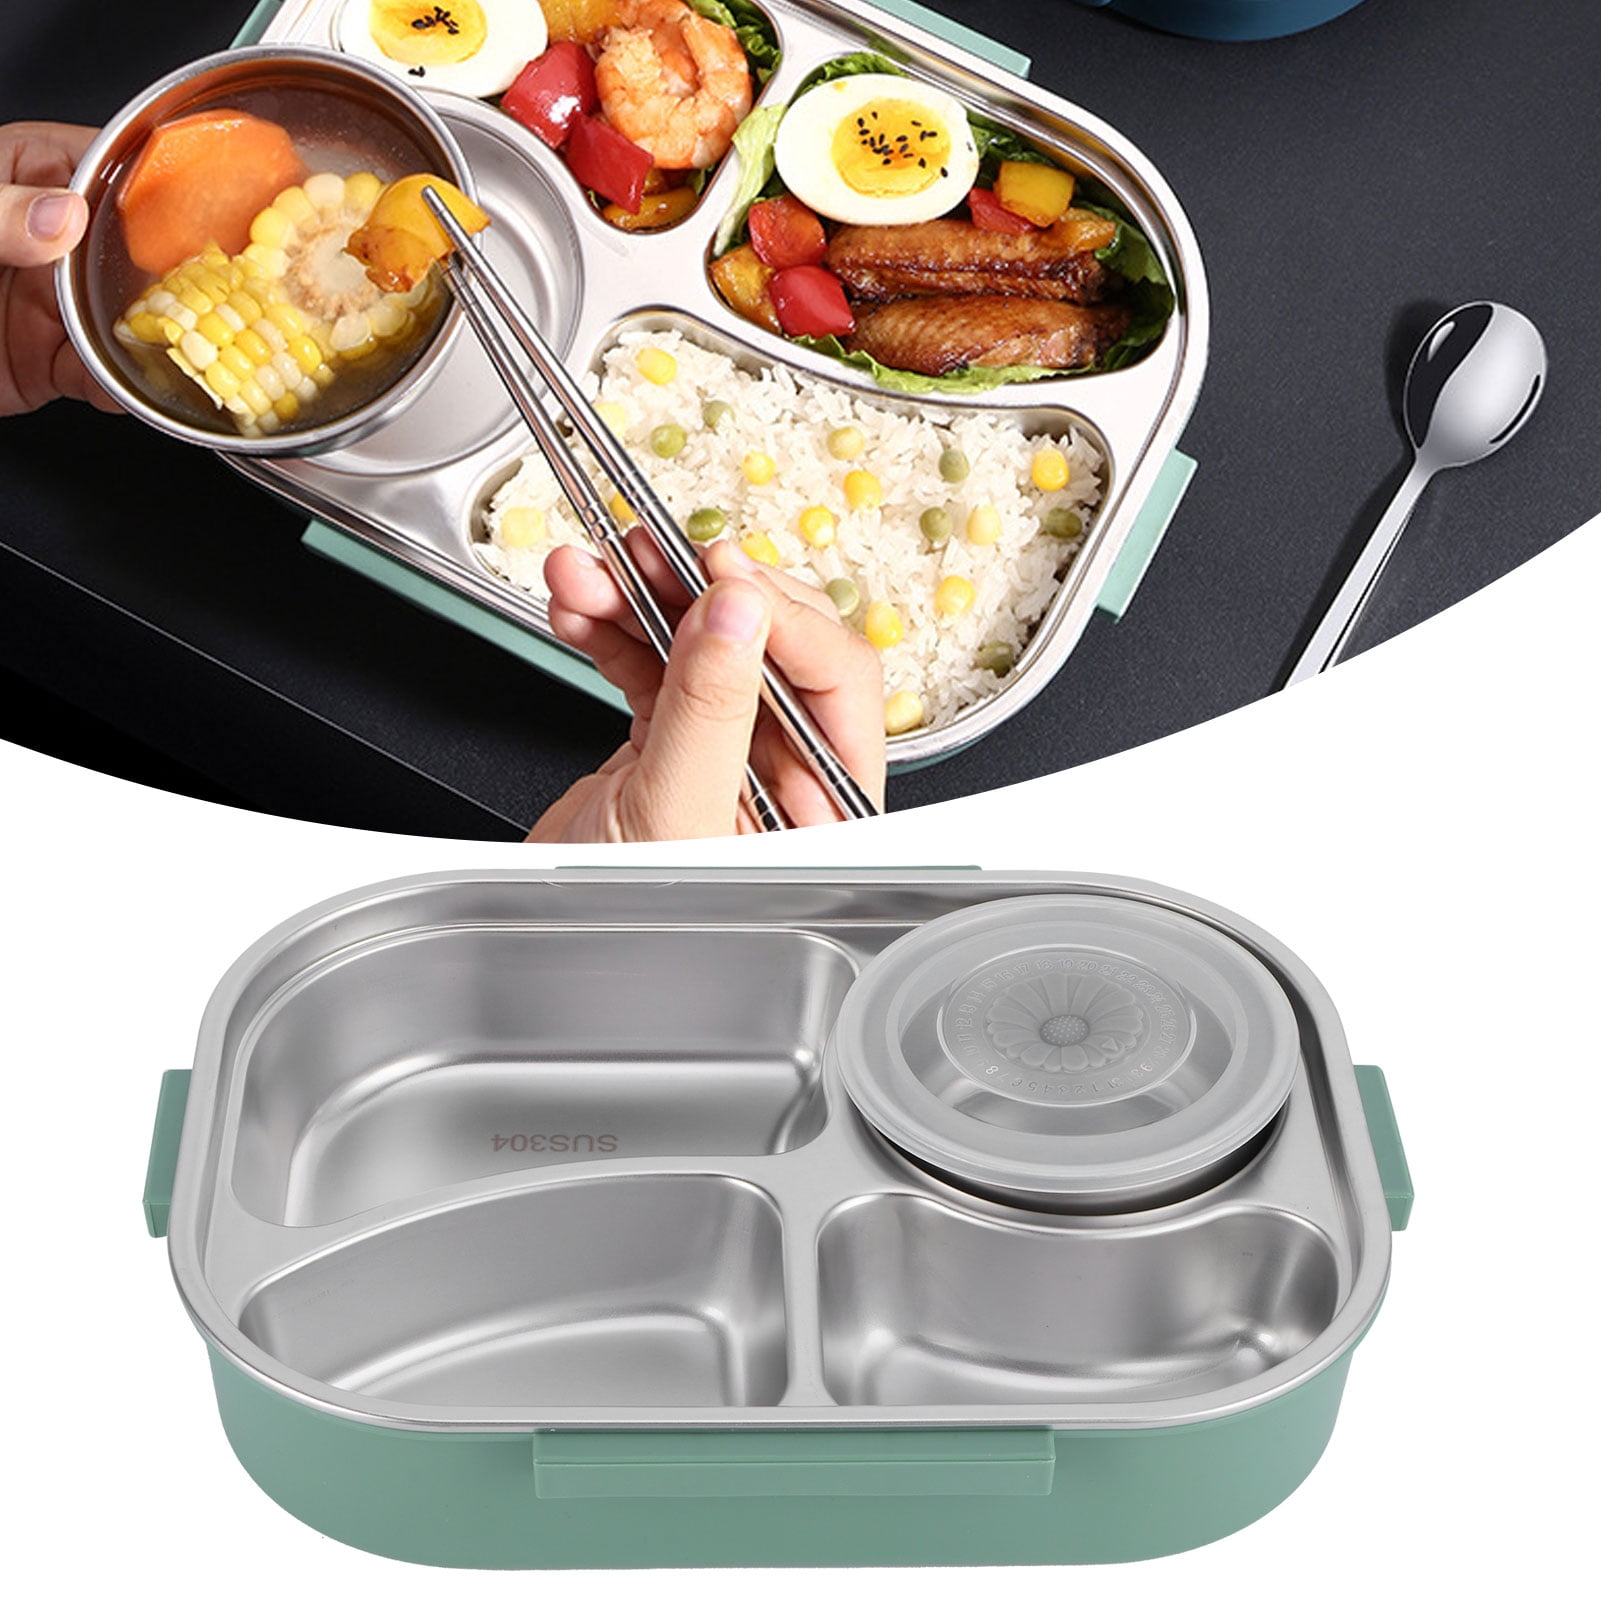 Stainless Steel Lunch Box 4grid Portable Bento Box Food Storage